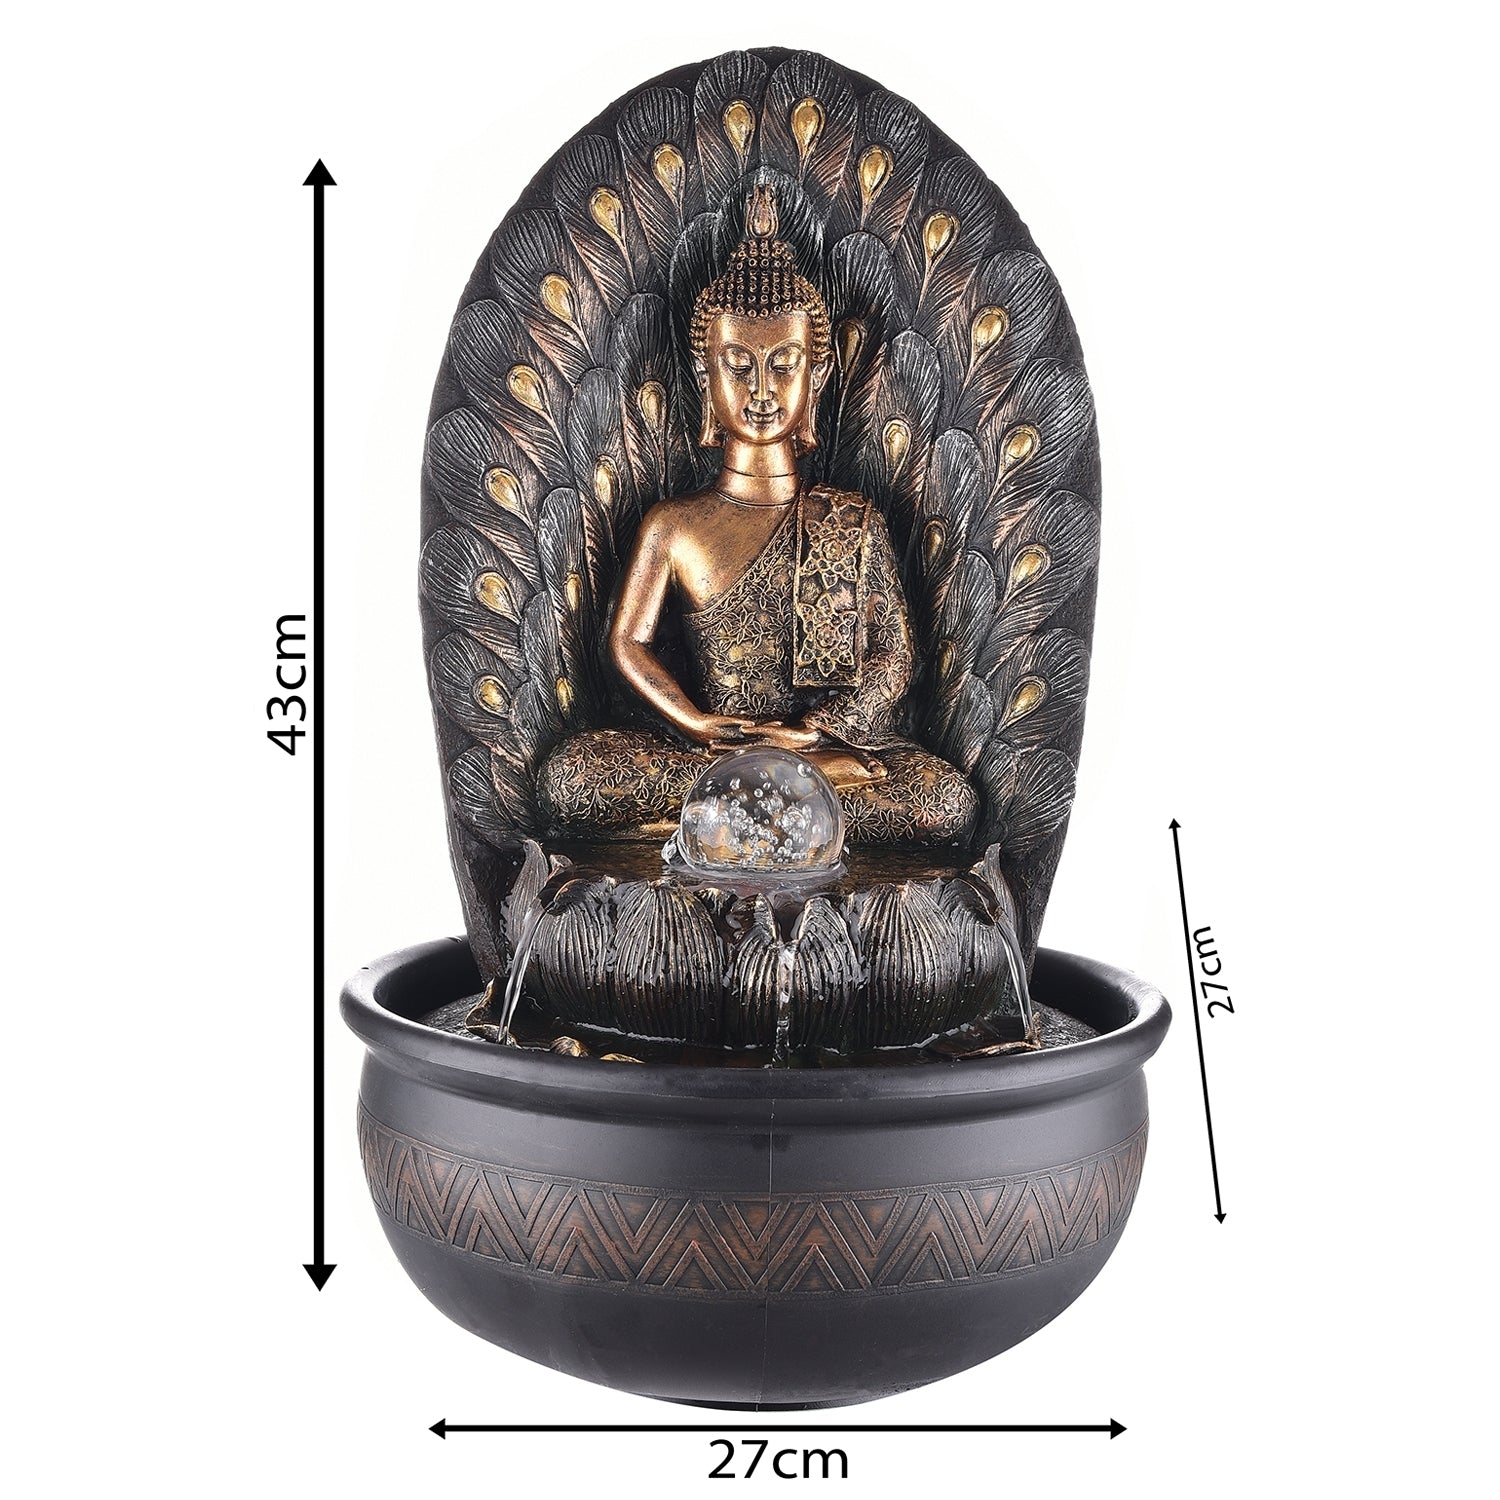 Polystone Leaf Textured Brown and Golden Meditating Buddha Idol Water Fountain With Crystal Ball for Home/Office Decor 1